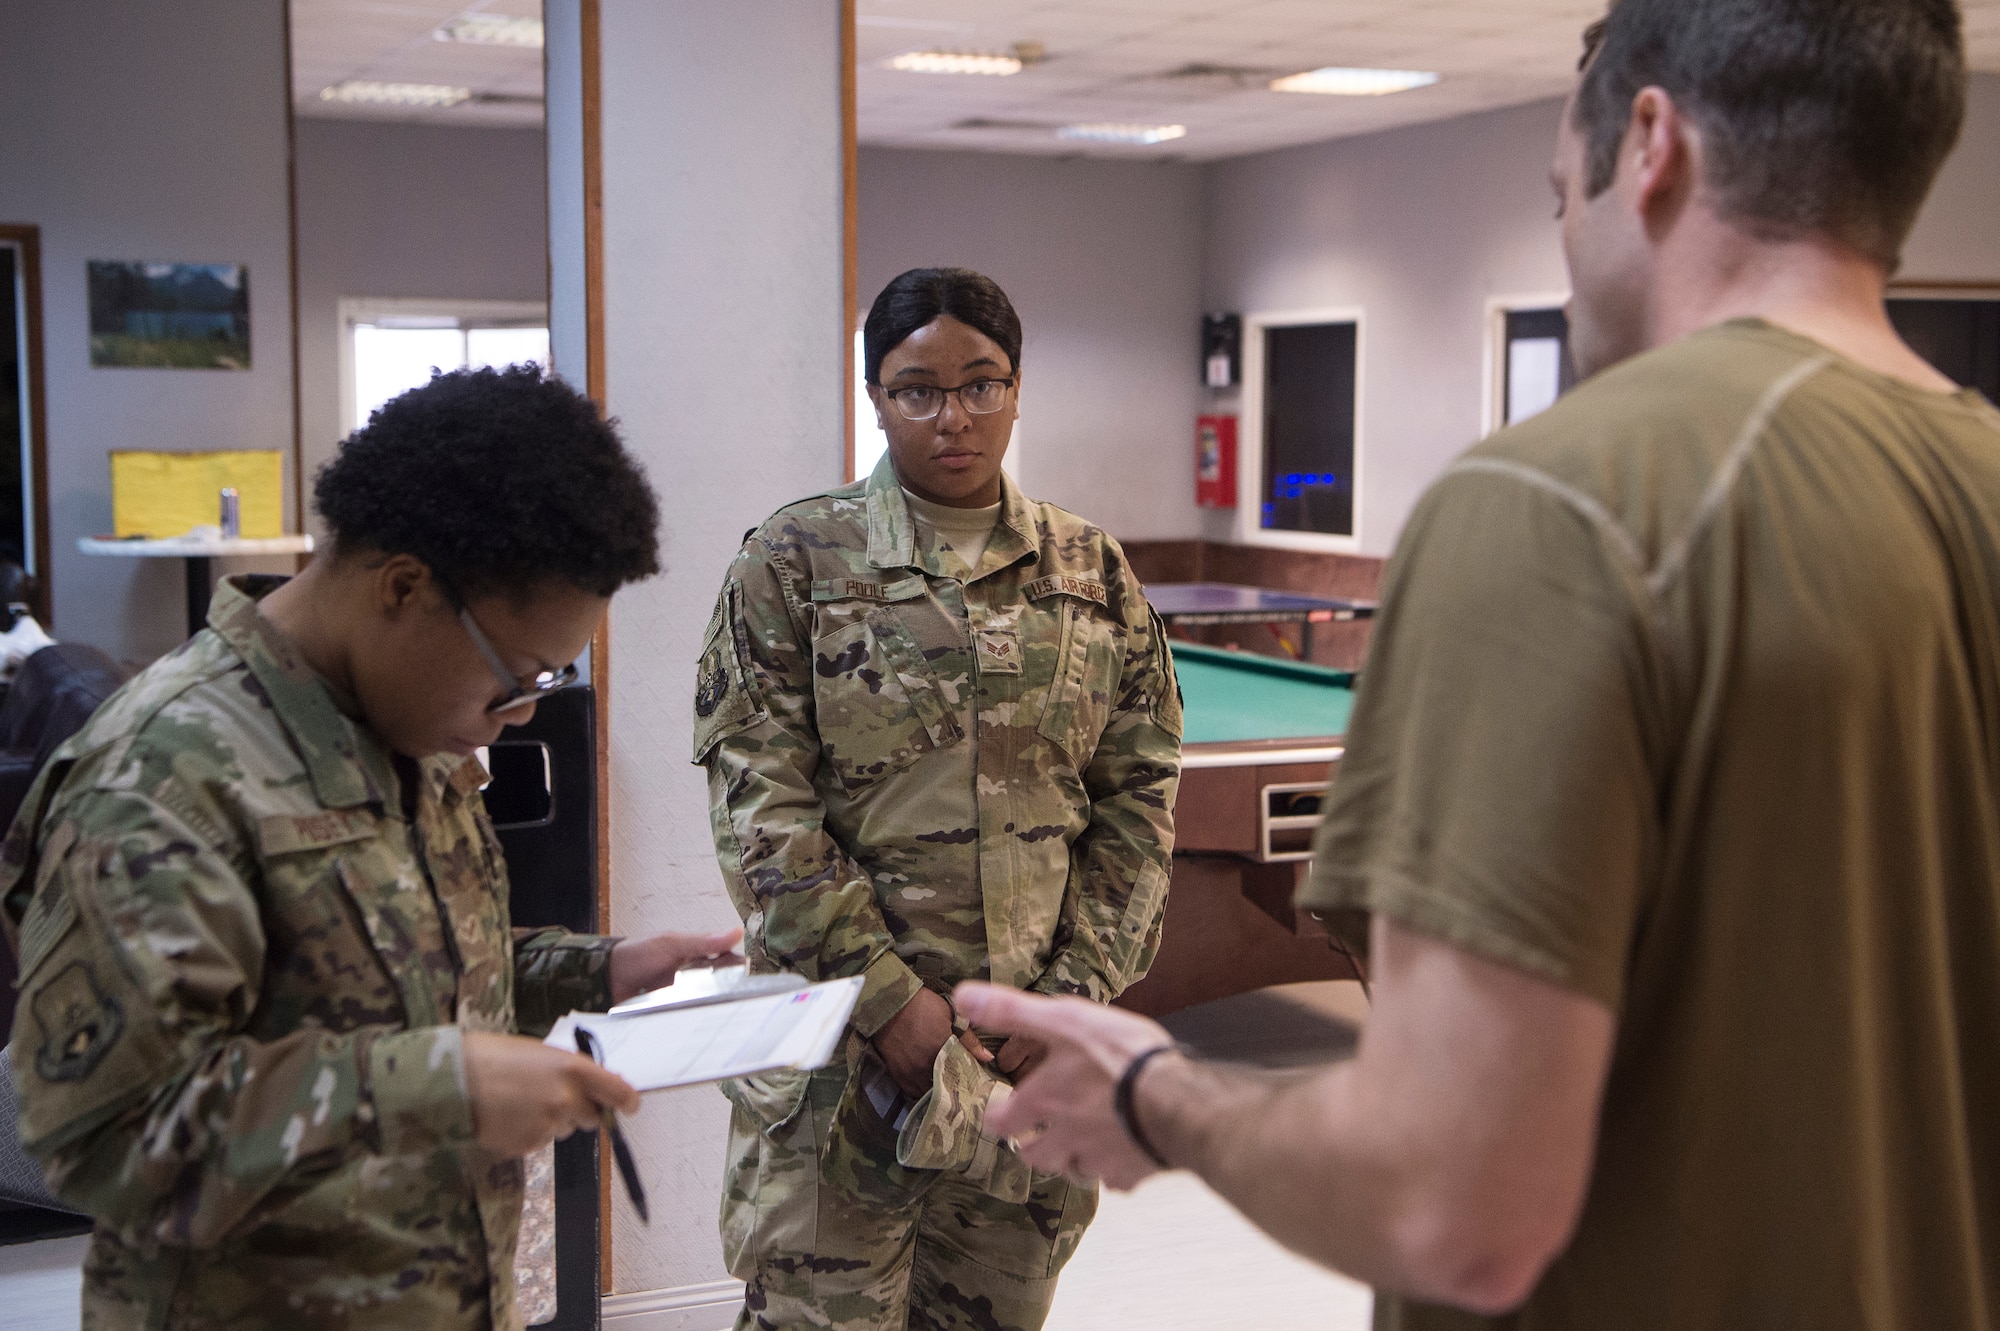 Airman 1st Class Dakaysiah Posey, left, and Senior Airman Daja Poole, center, both 379th Expeditionary Logistics Readiness Squadron (ELRS) Air Force Transient Reception Control Center logistics planners, answer an Airman’s question at Al Udeid Air Base, Qatar, Jan. 5, 2019. 379th ELRS log planners relay transportation information to service members traveling to deployed locations across U.S. Central Command’s area of responsibility. They provide warfighters in transition support including lodging, means of communication and vehicles to ensure mission effectiveness as they wait for forward deployment.  (U.S. Air Force photo by Tech. Sgt. Christopher Hubenthal)